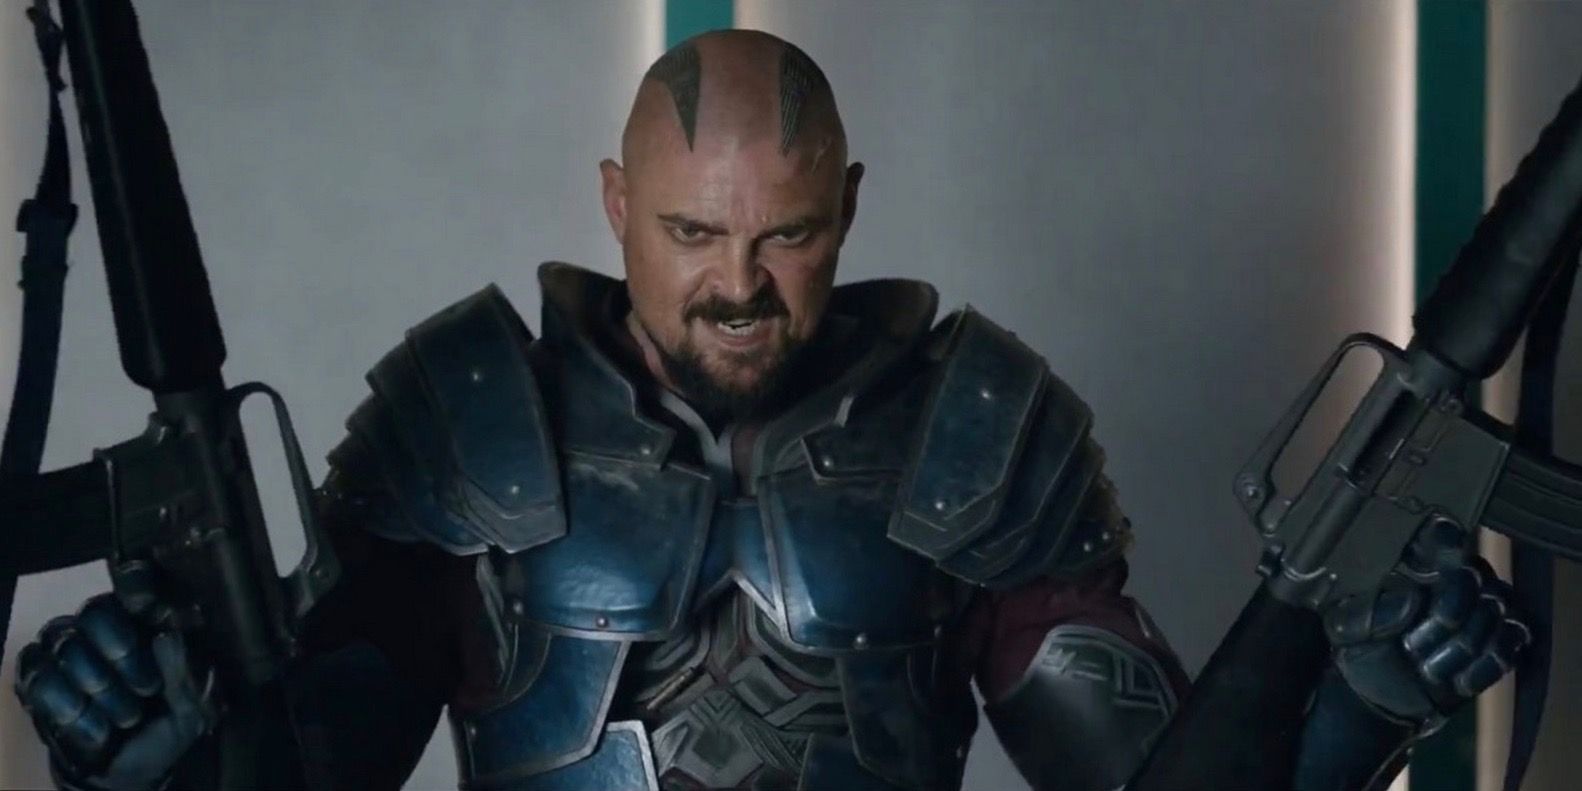 An image of Skurge holding two guns in Thor: Ragnarok